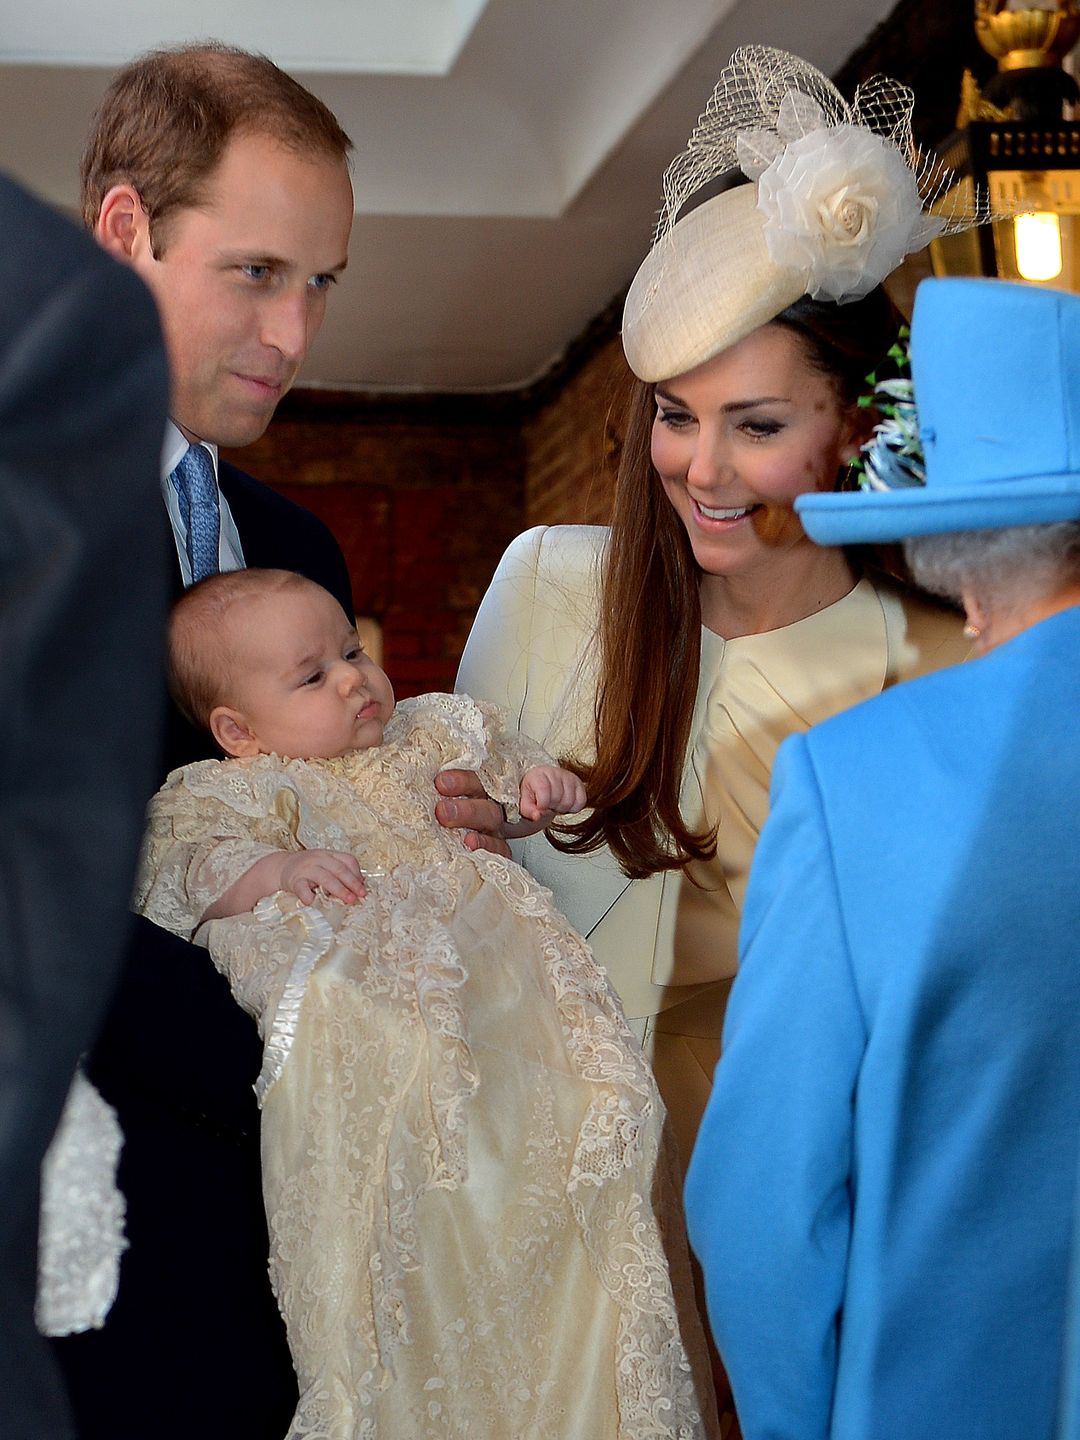 Queen Elizabeth II with Prince William and his wife Catherine at their son Prince George's christening 